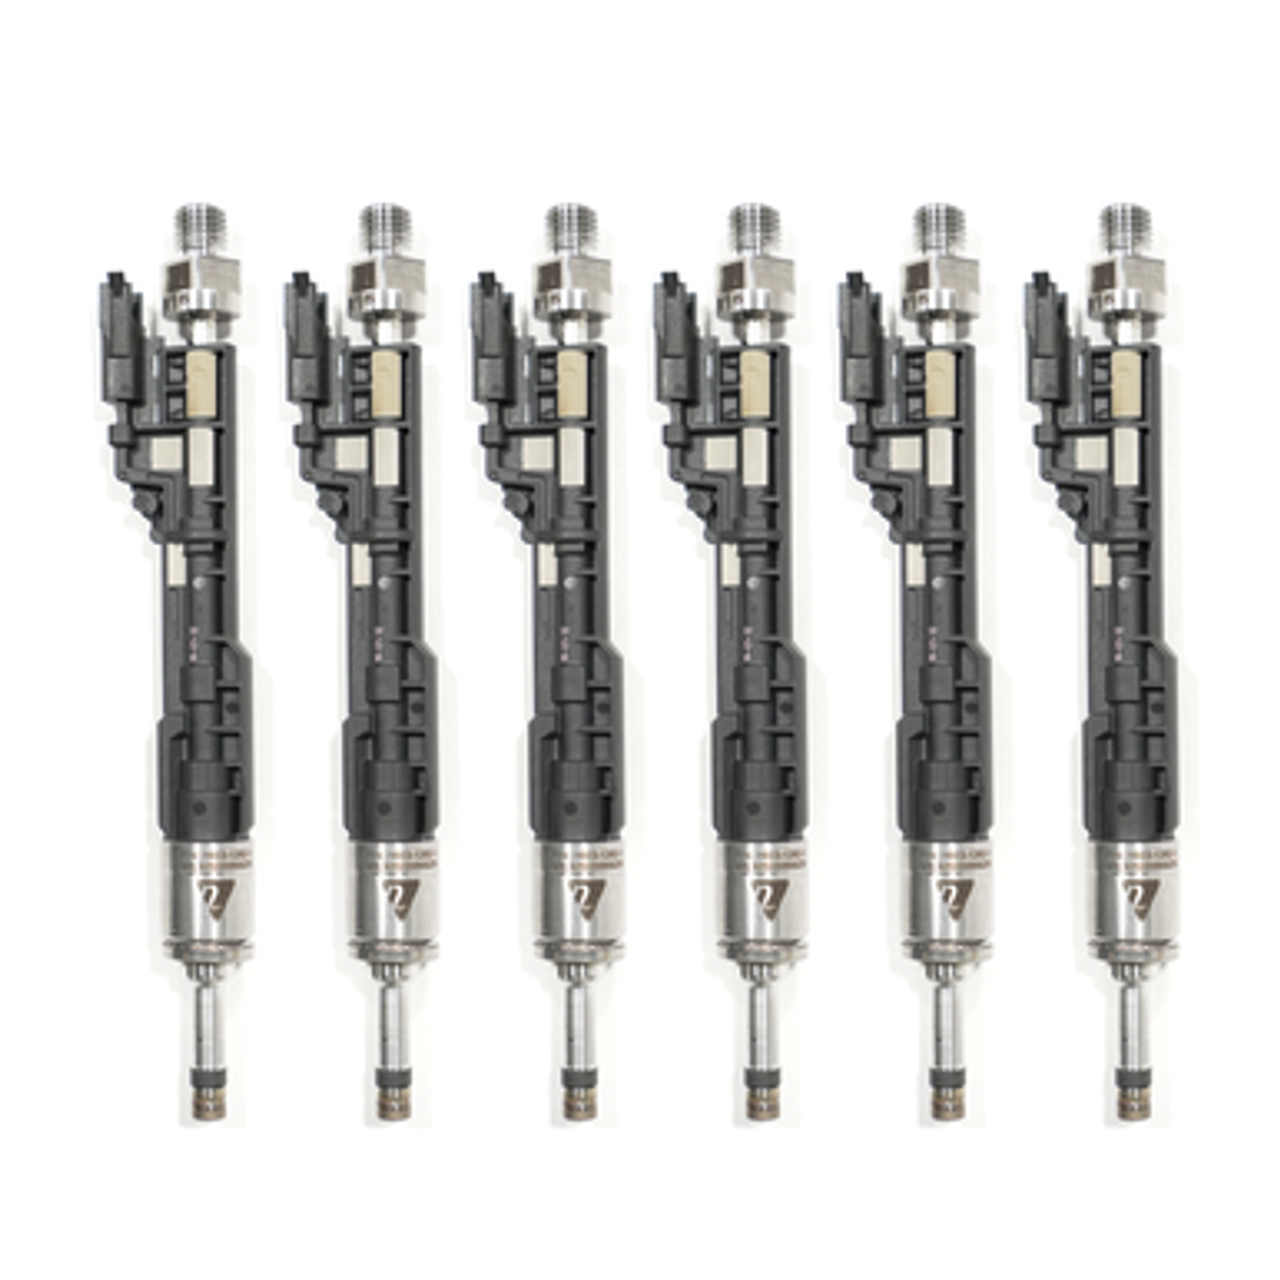 Bmw_stage_2_DI_injector_bigcommerce_image__56773__40695